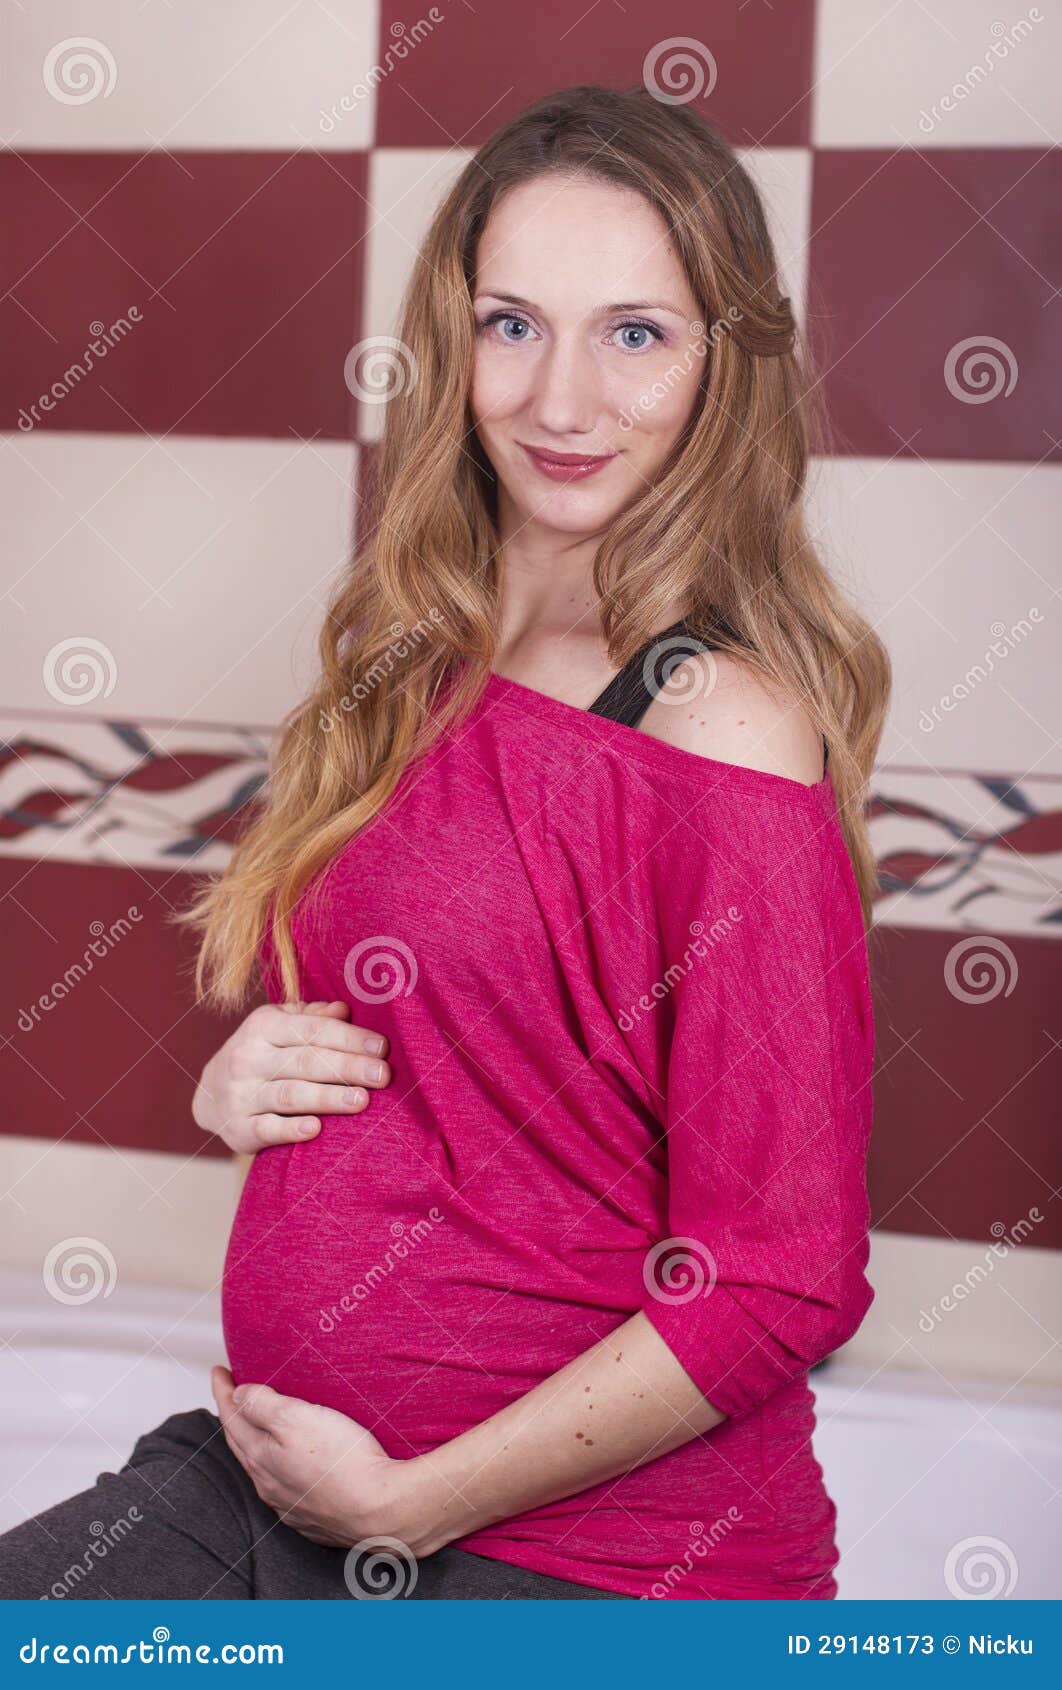 Cute Pregnant Woman Stock Image Image Of Colors Eyes